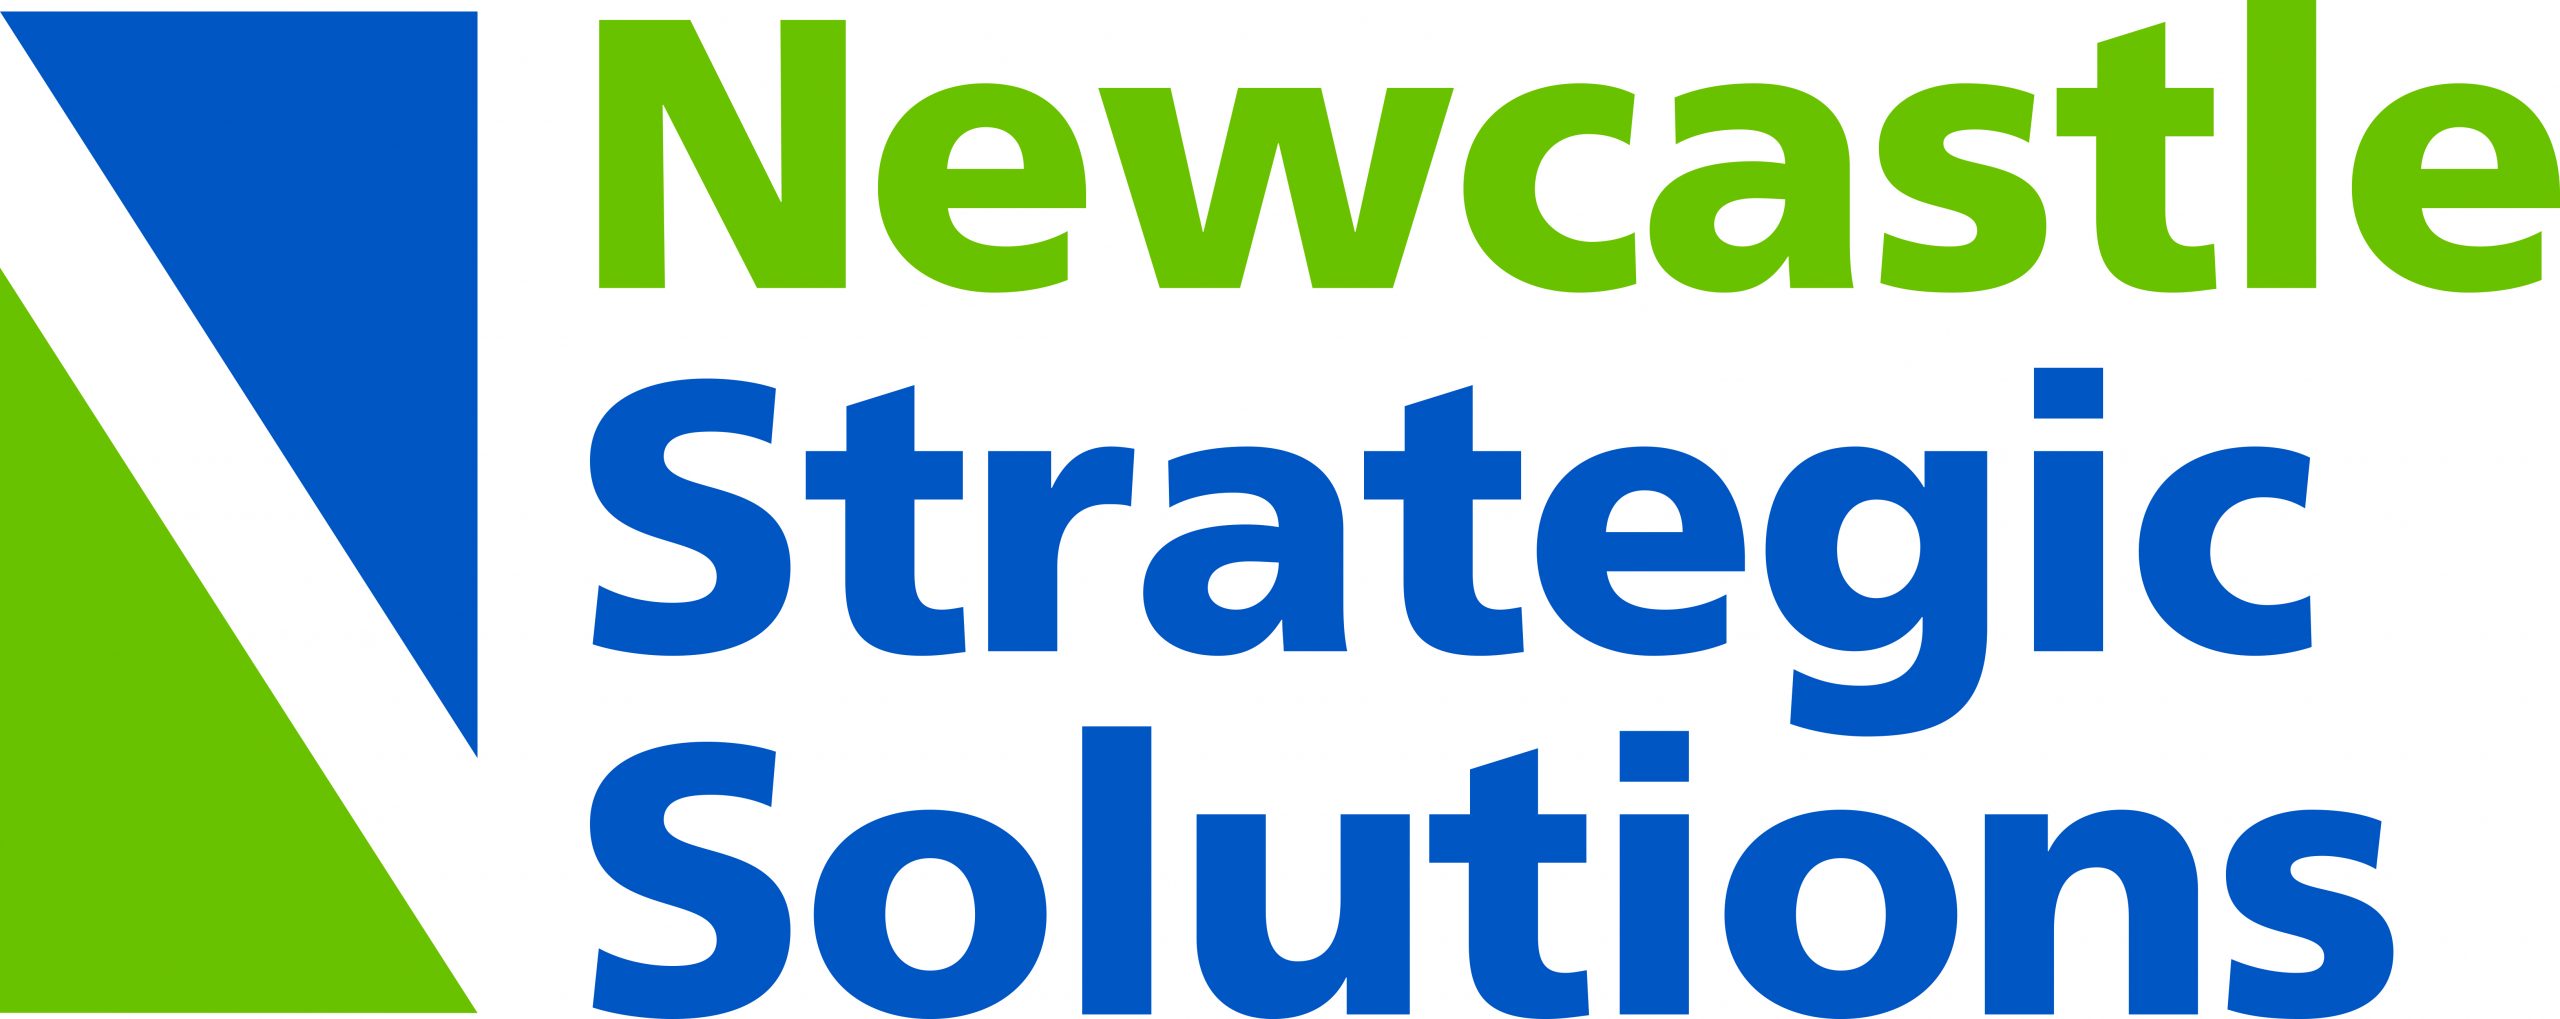 Partner Profile – Manila McLean, Chief Information Officer, Newcastle Strategic Solutions